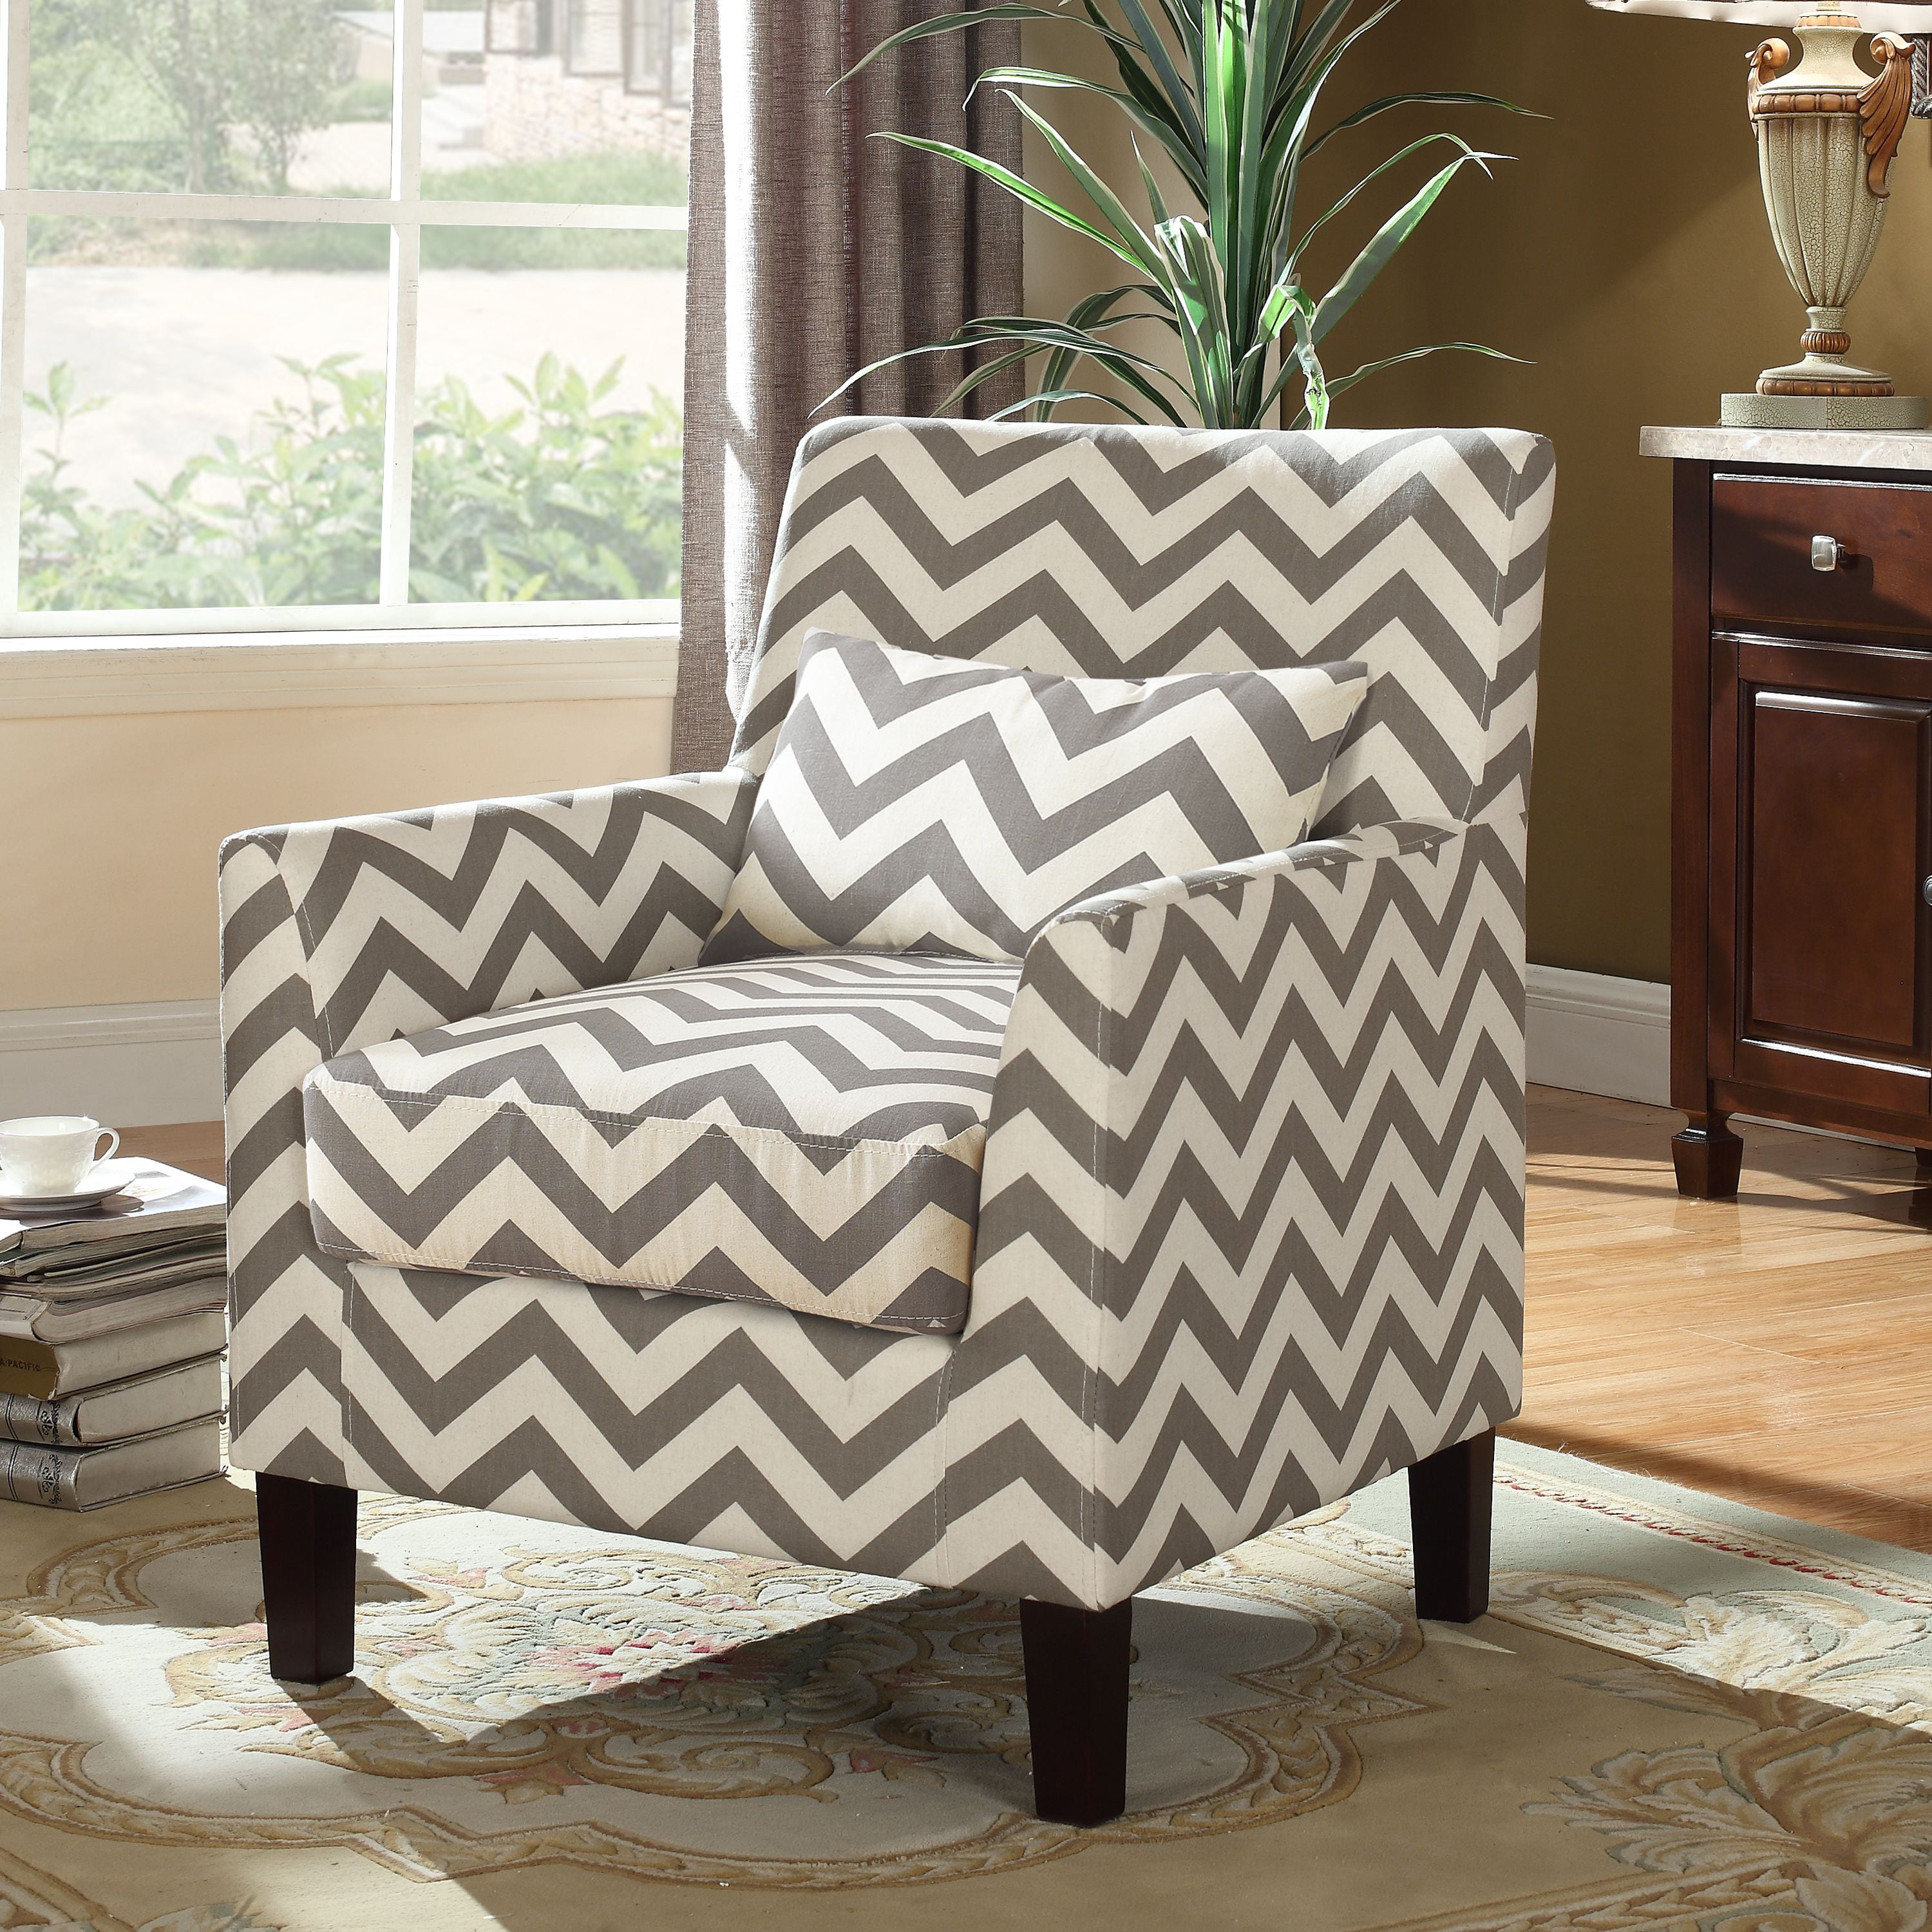 Best Quality Upholstered Living Room Chairs